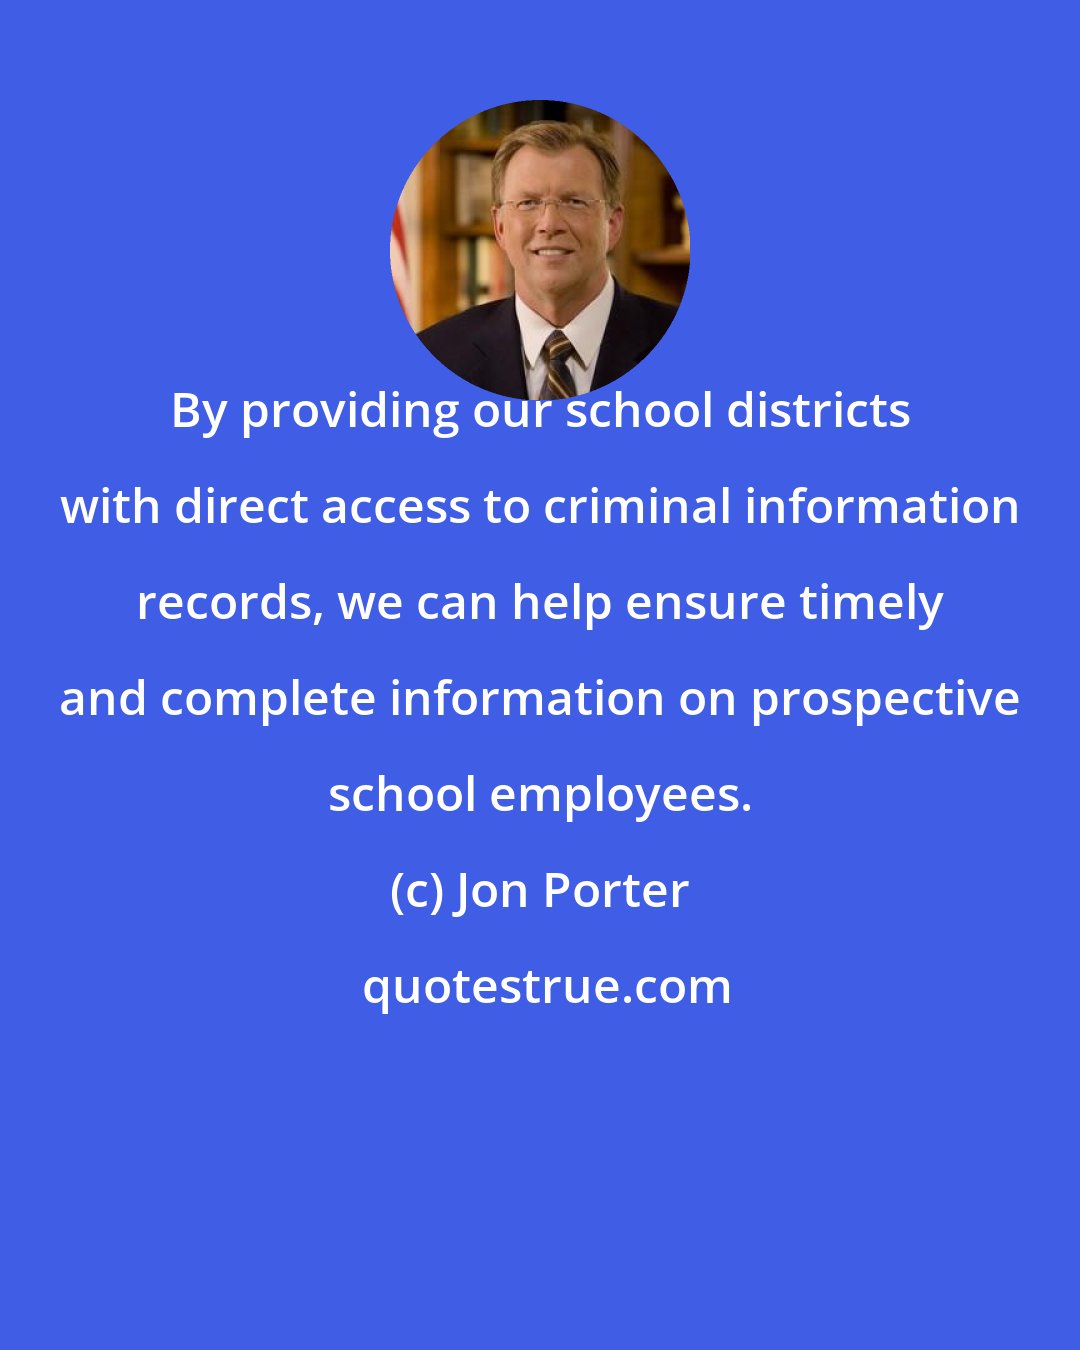 Jon Porter: By providing our school districts with direct access to criminal information records, we can help ensure timely and complete information on prospective school employees.